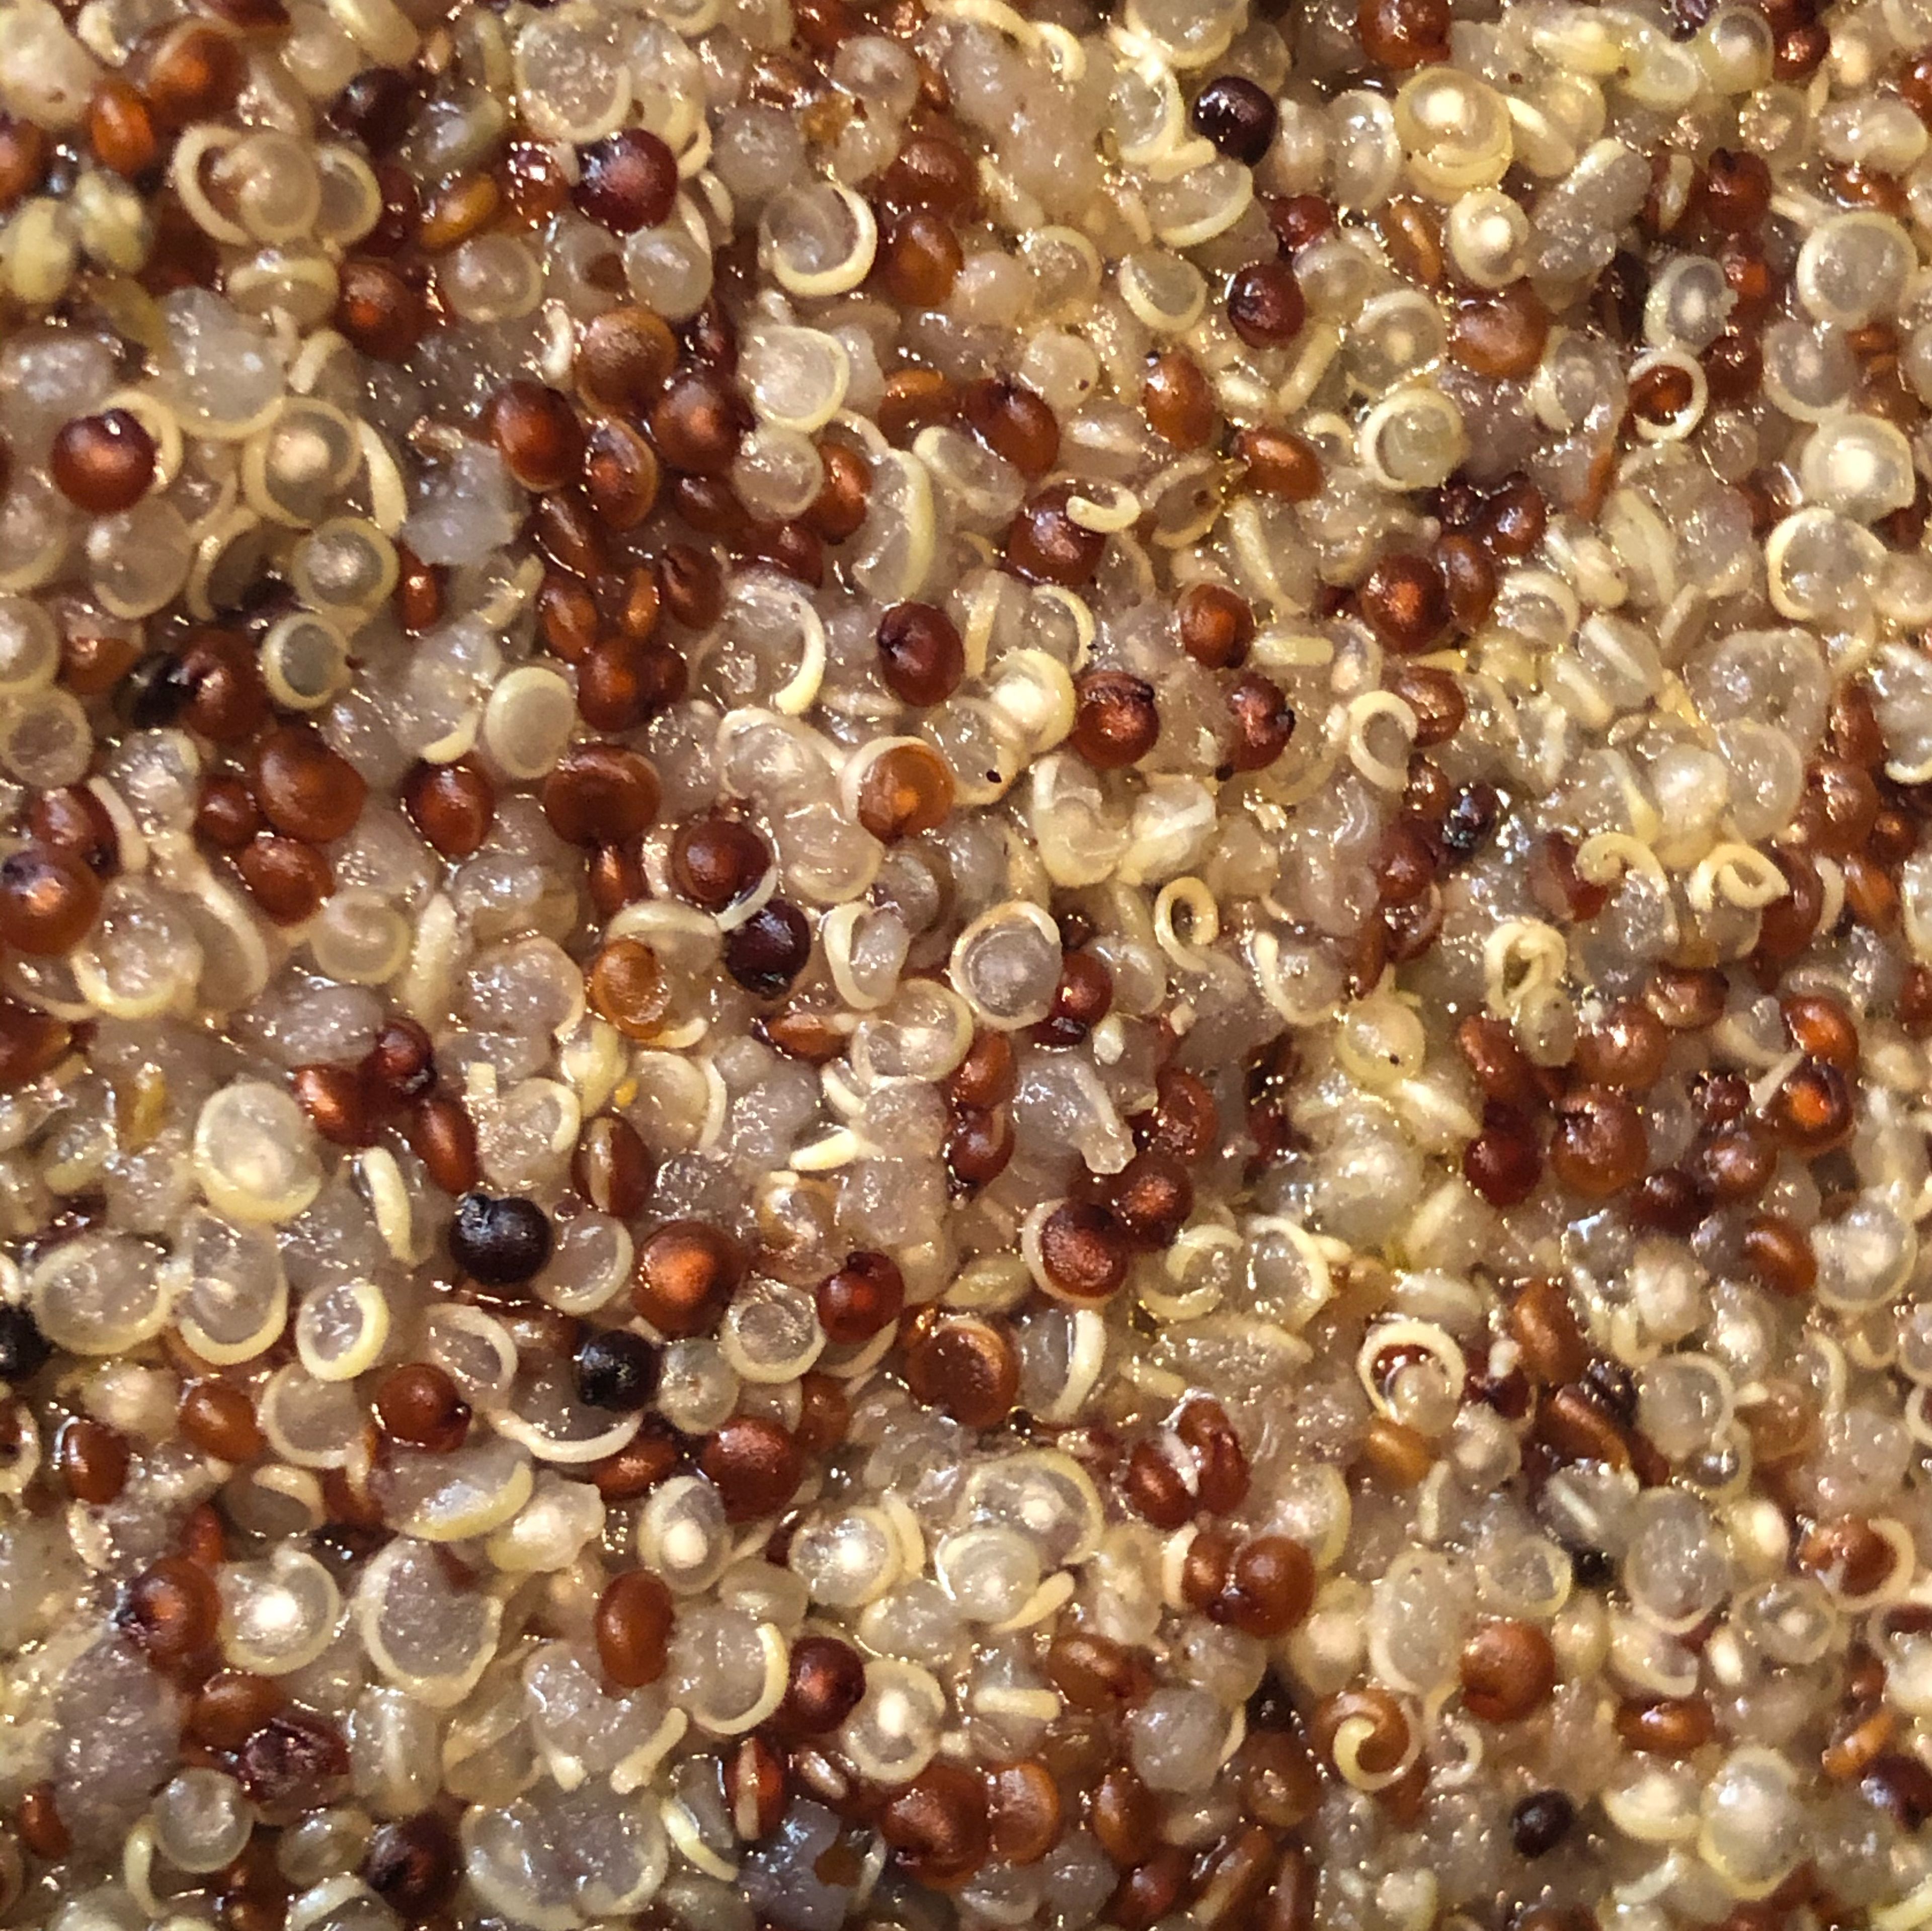 You should see tiny spirals (the germ) separating from and curling around the quinoa seeds when it’s ready. If any liquid remains in the bottom of the pan or if the quinoa is still a bit crunchy, return the pot to low heat and cook, covered, for another 5 minutes, until all the water has been absorbed.